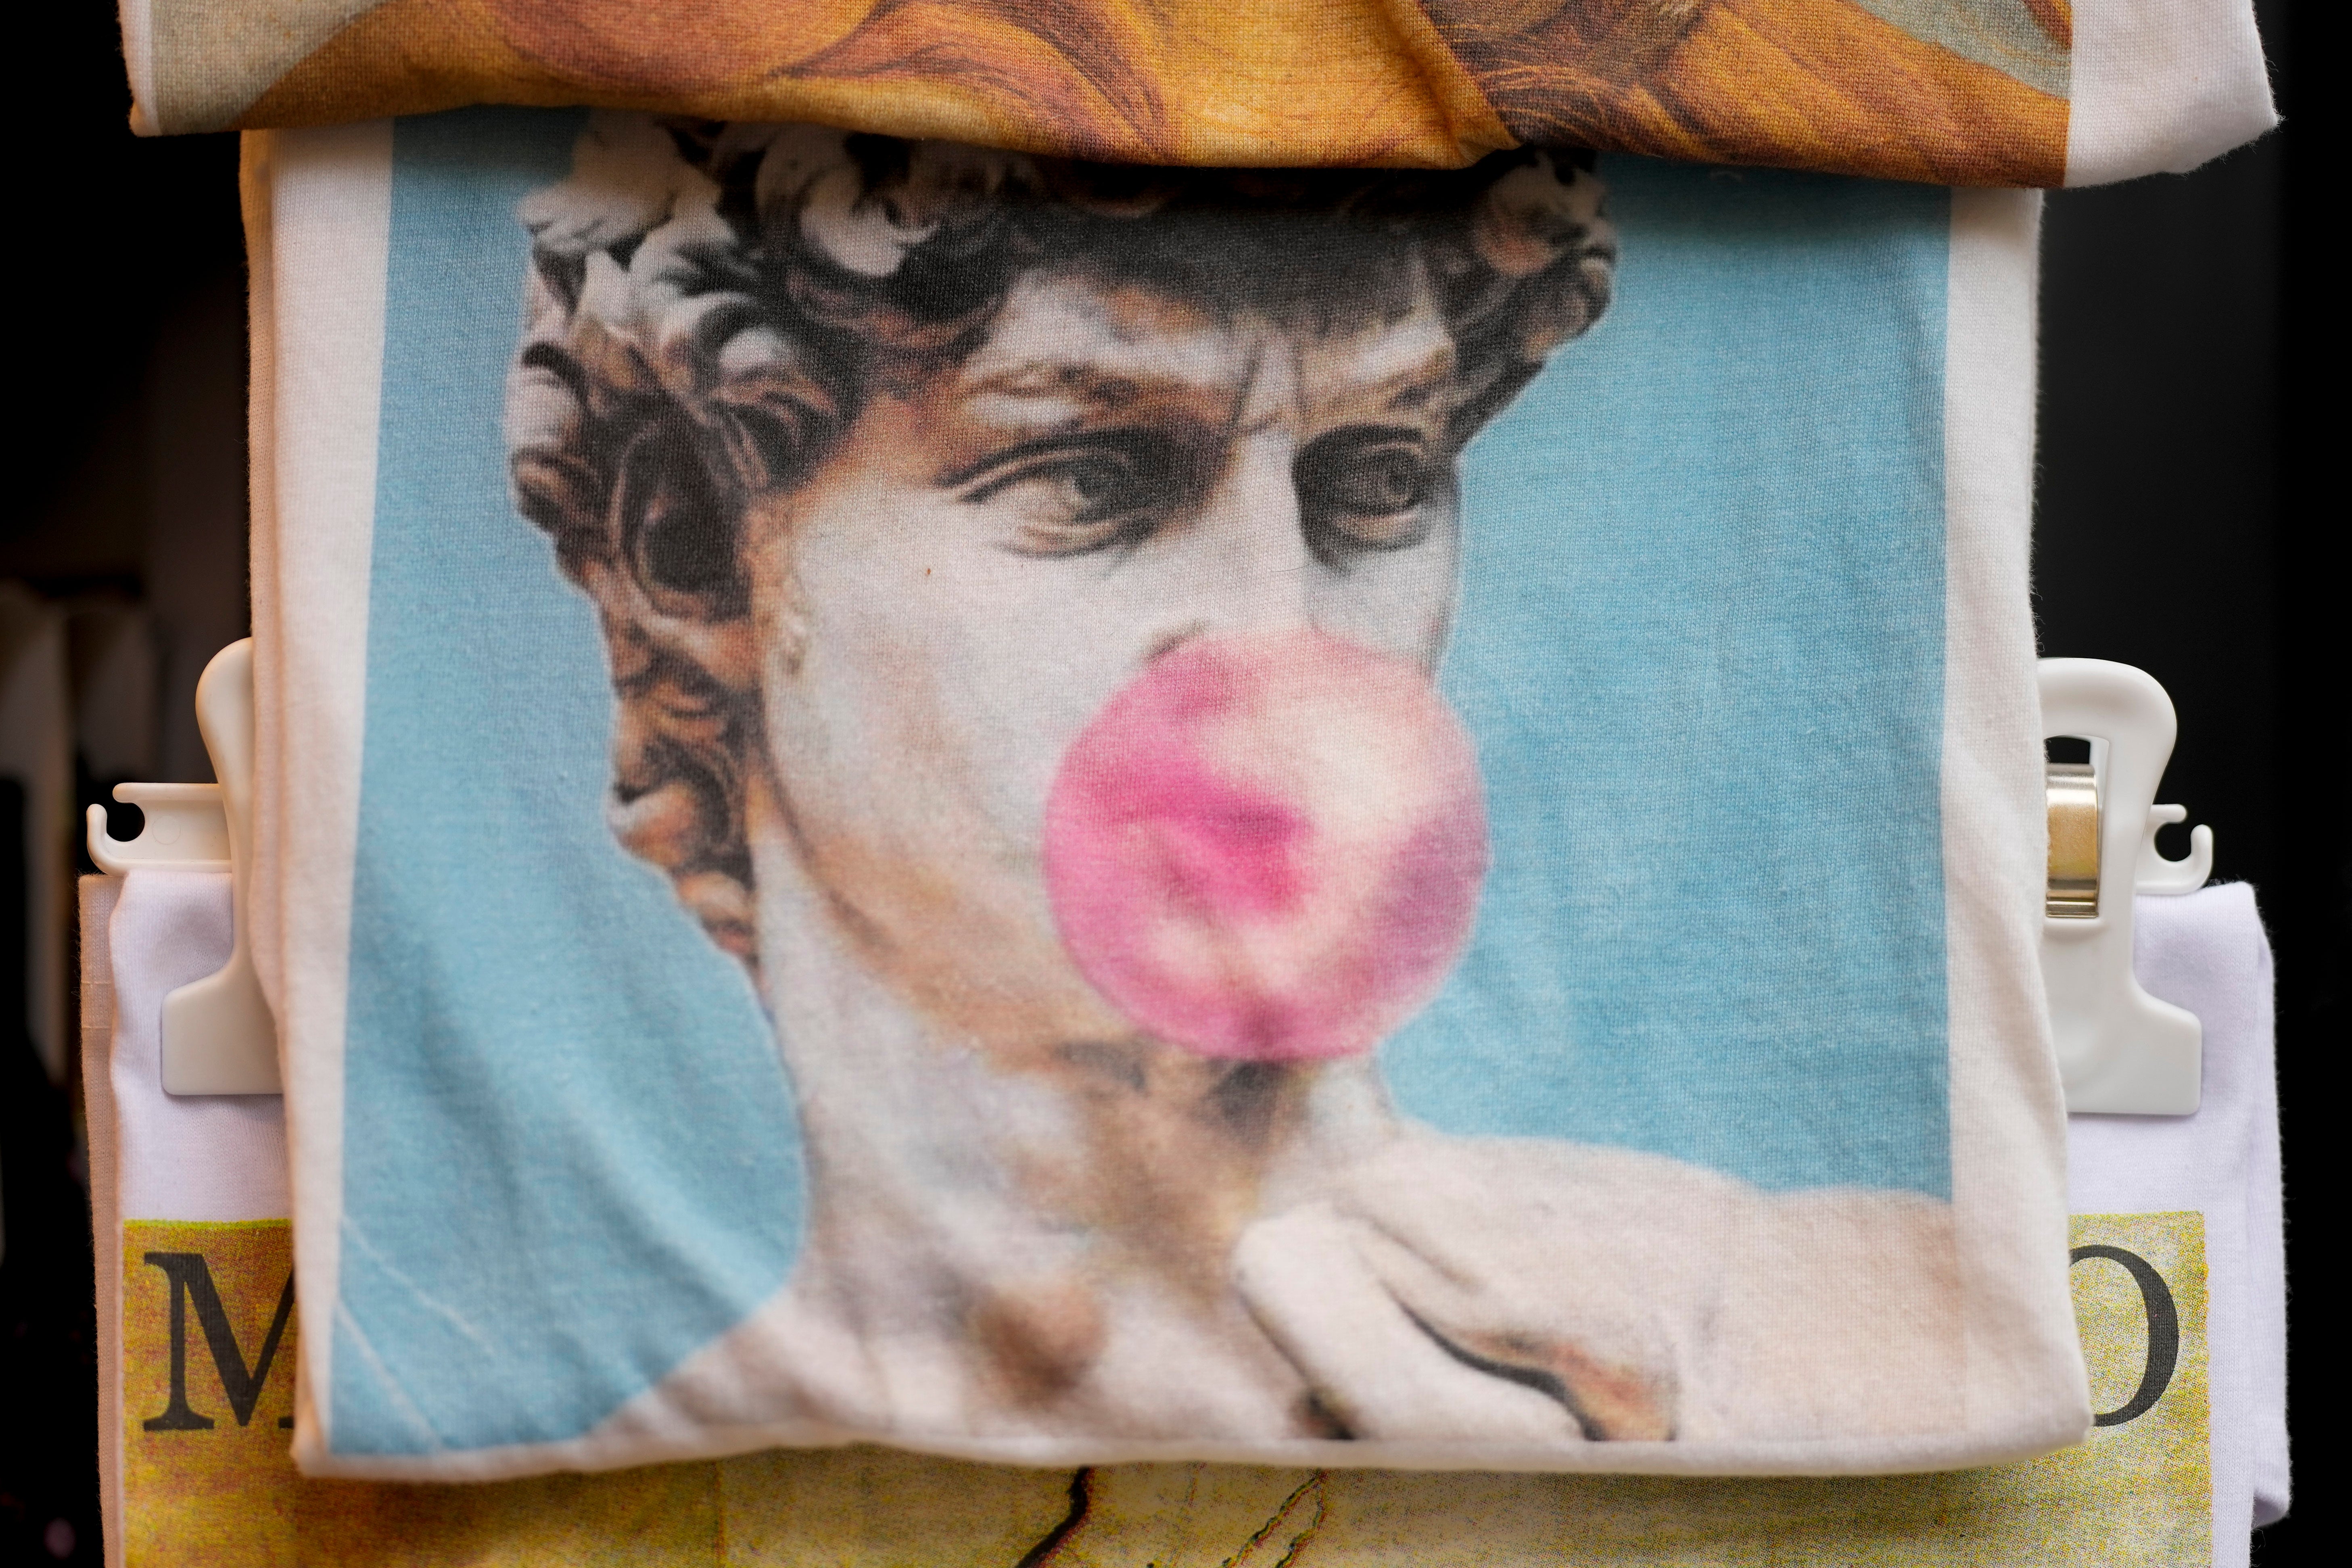 A bag depicting David blowing bubble gum on sale in Florence